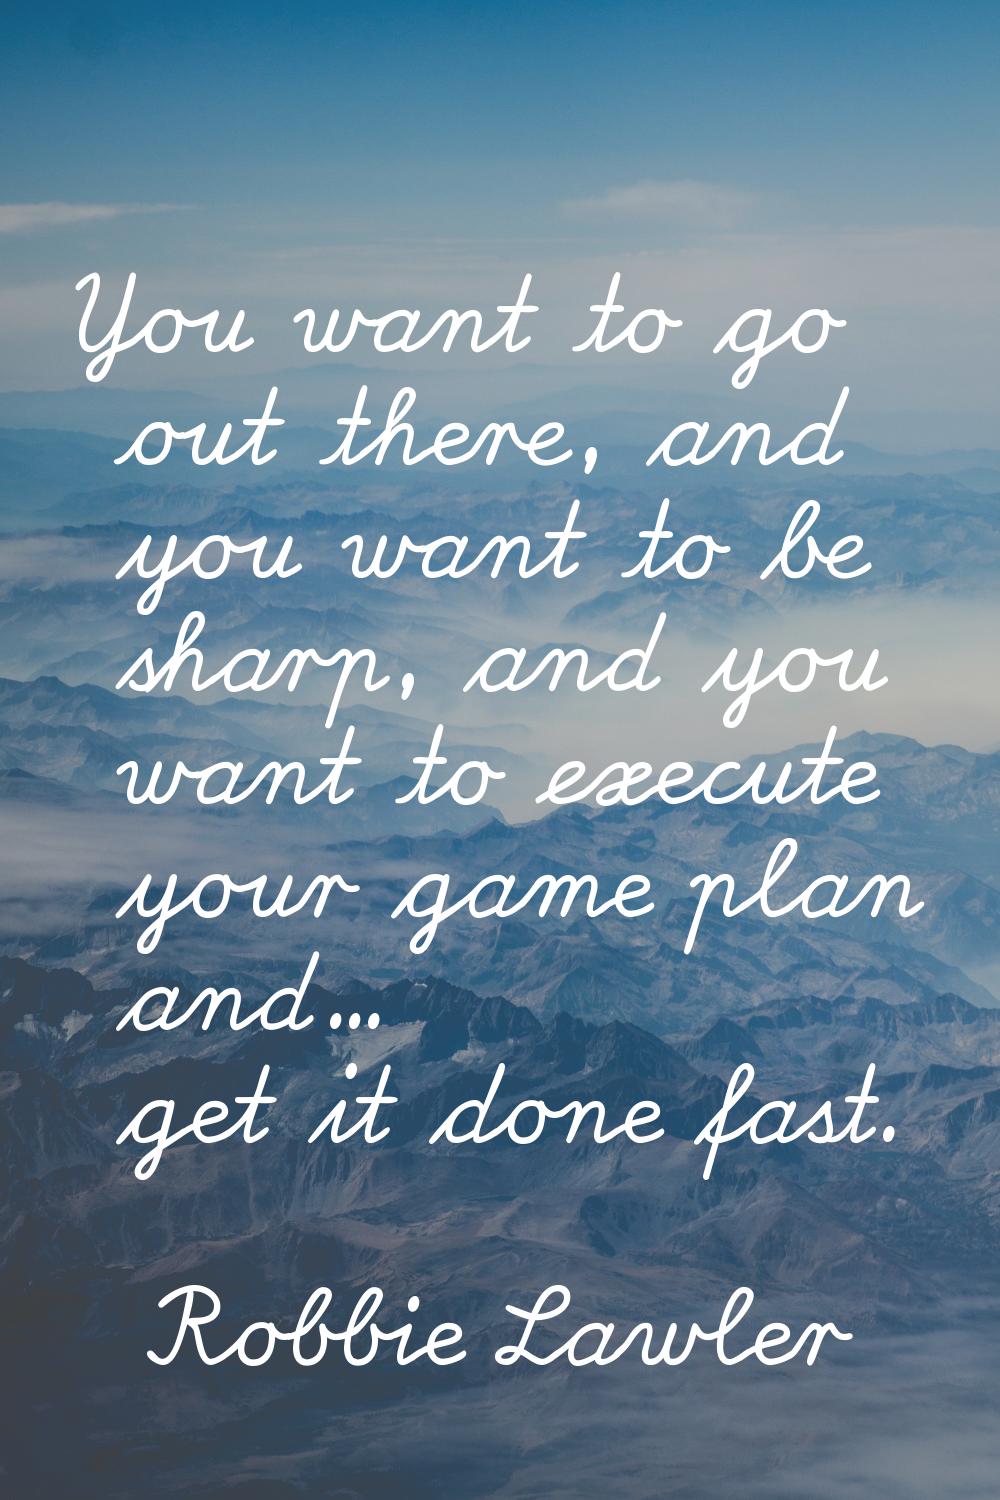 You want to go out there, and you want to be sharp, and you want to execute your game plan and... g